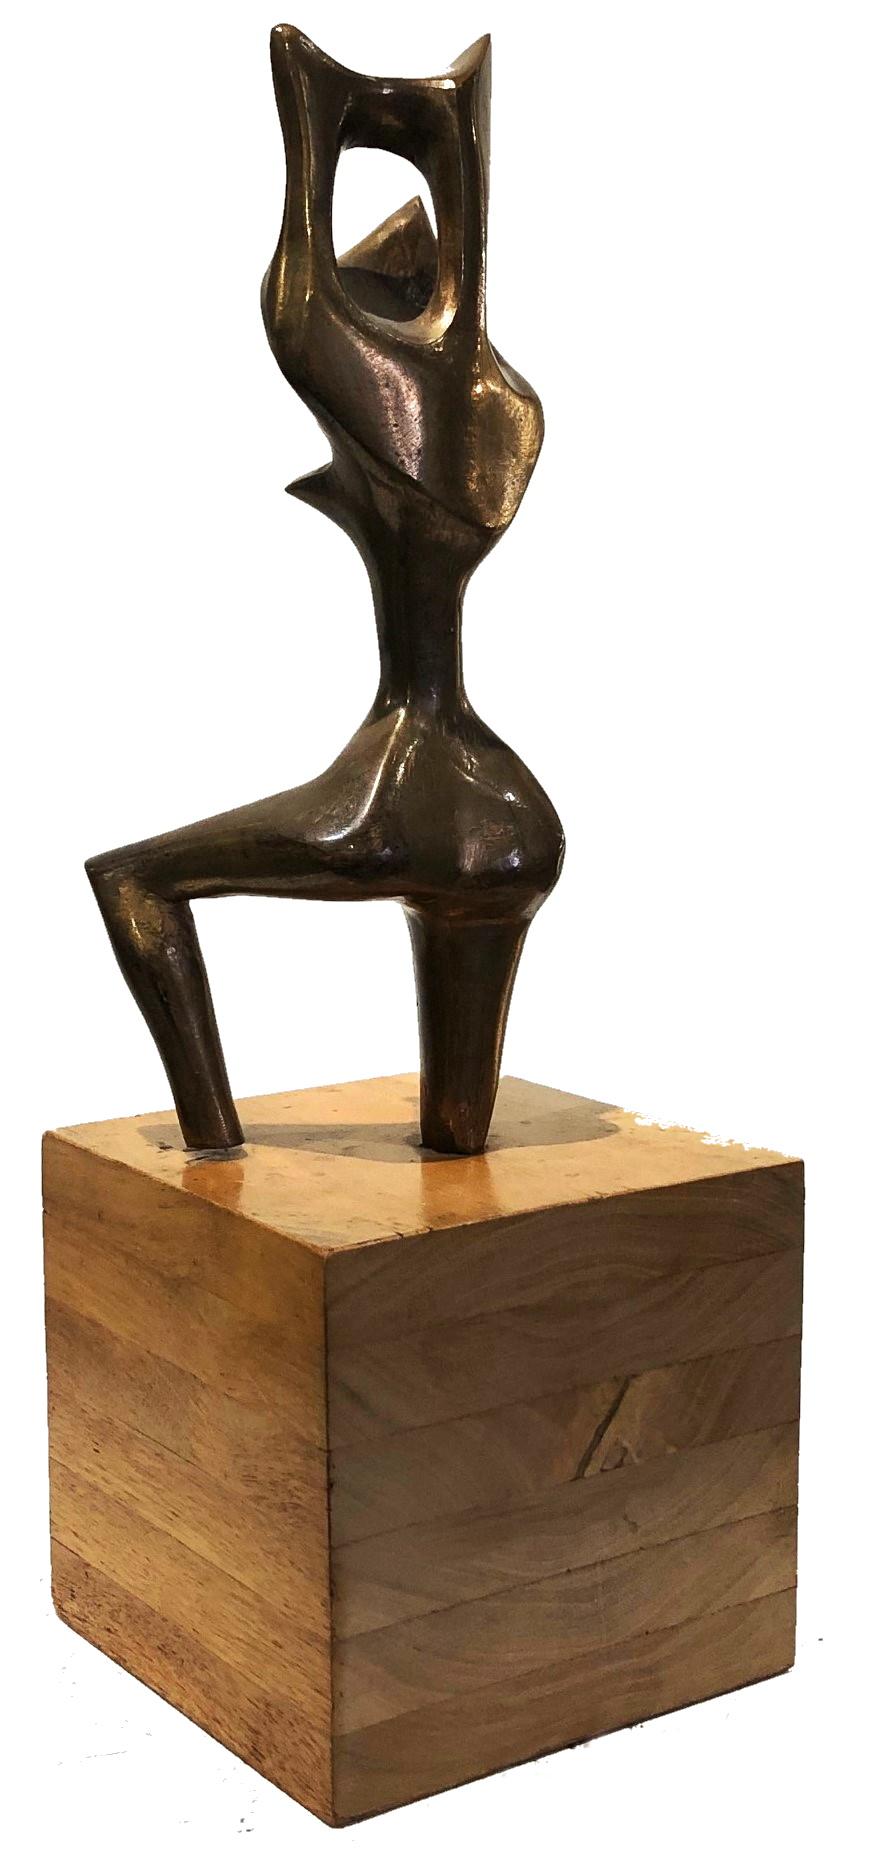 Mid-20th Century Surrealist Abstract Bronze Sculpture in Manner of Wifredo Lam, ca. 1950's-60's For Sale